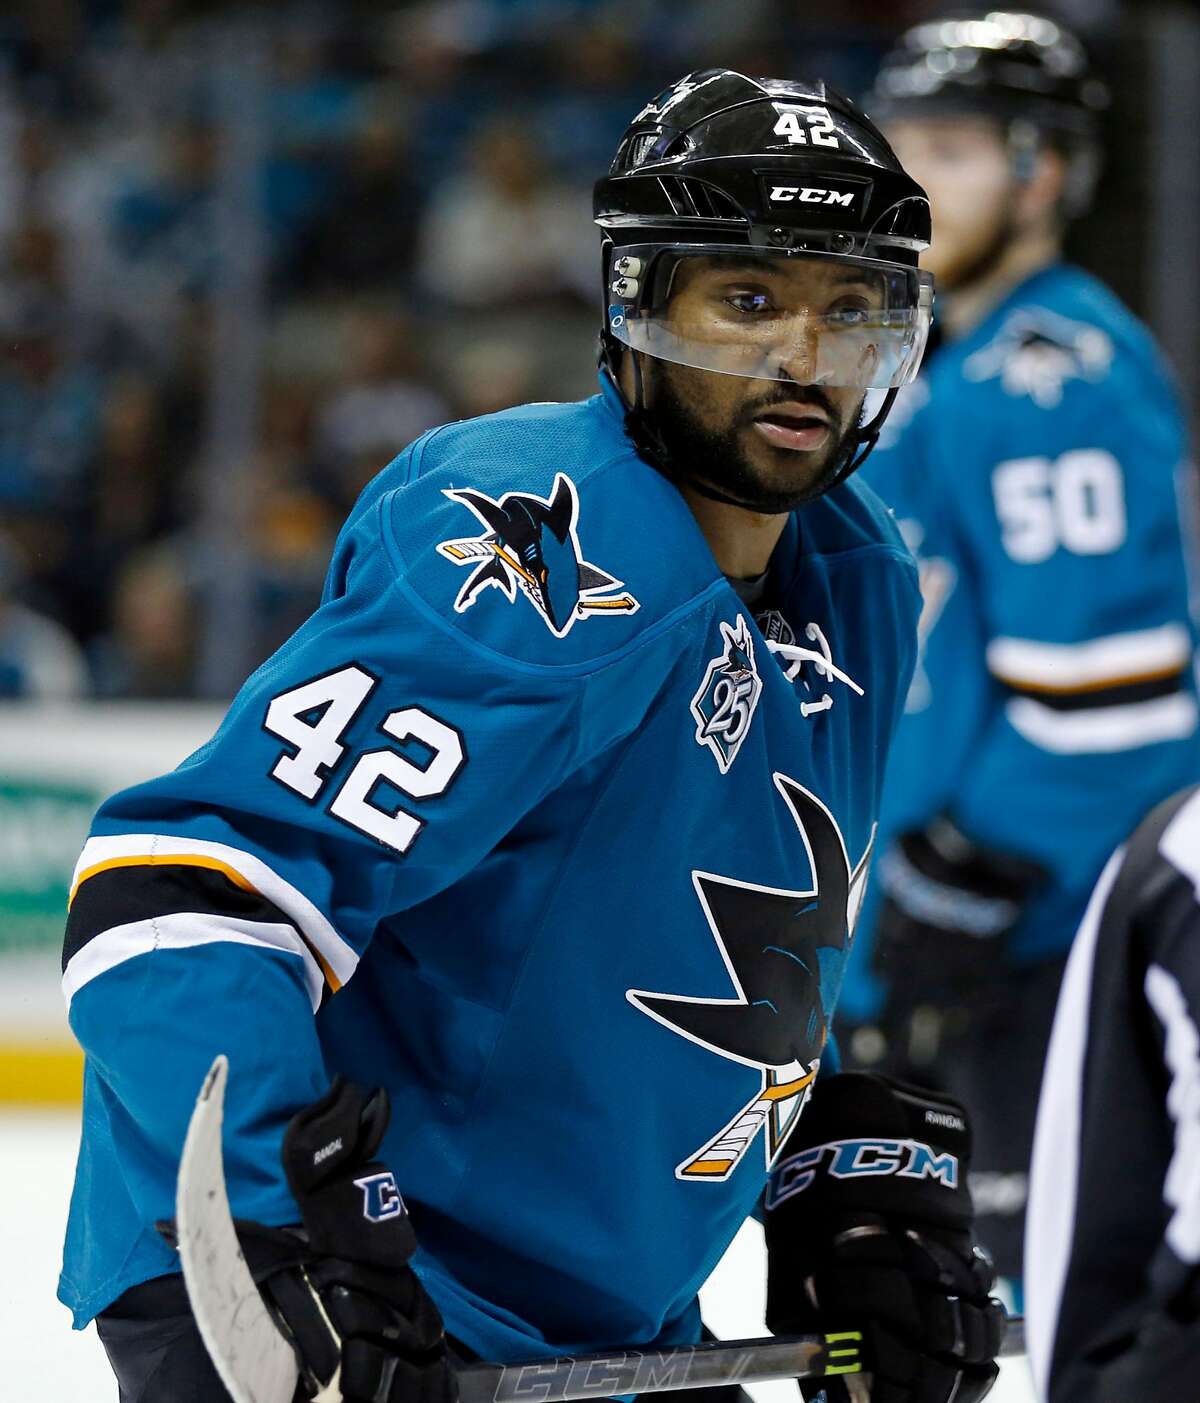 Joel Ward helps lead Sharks to first Stanley Cup Finals